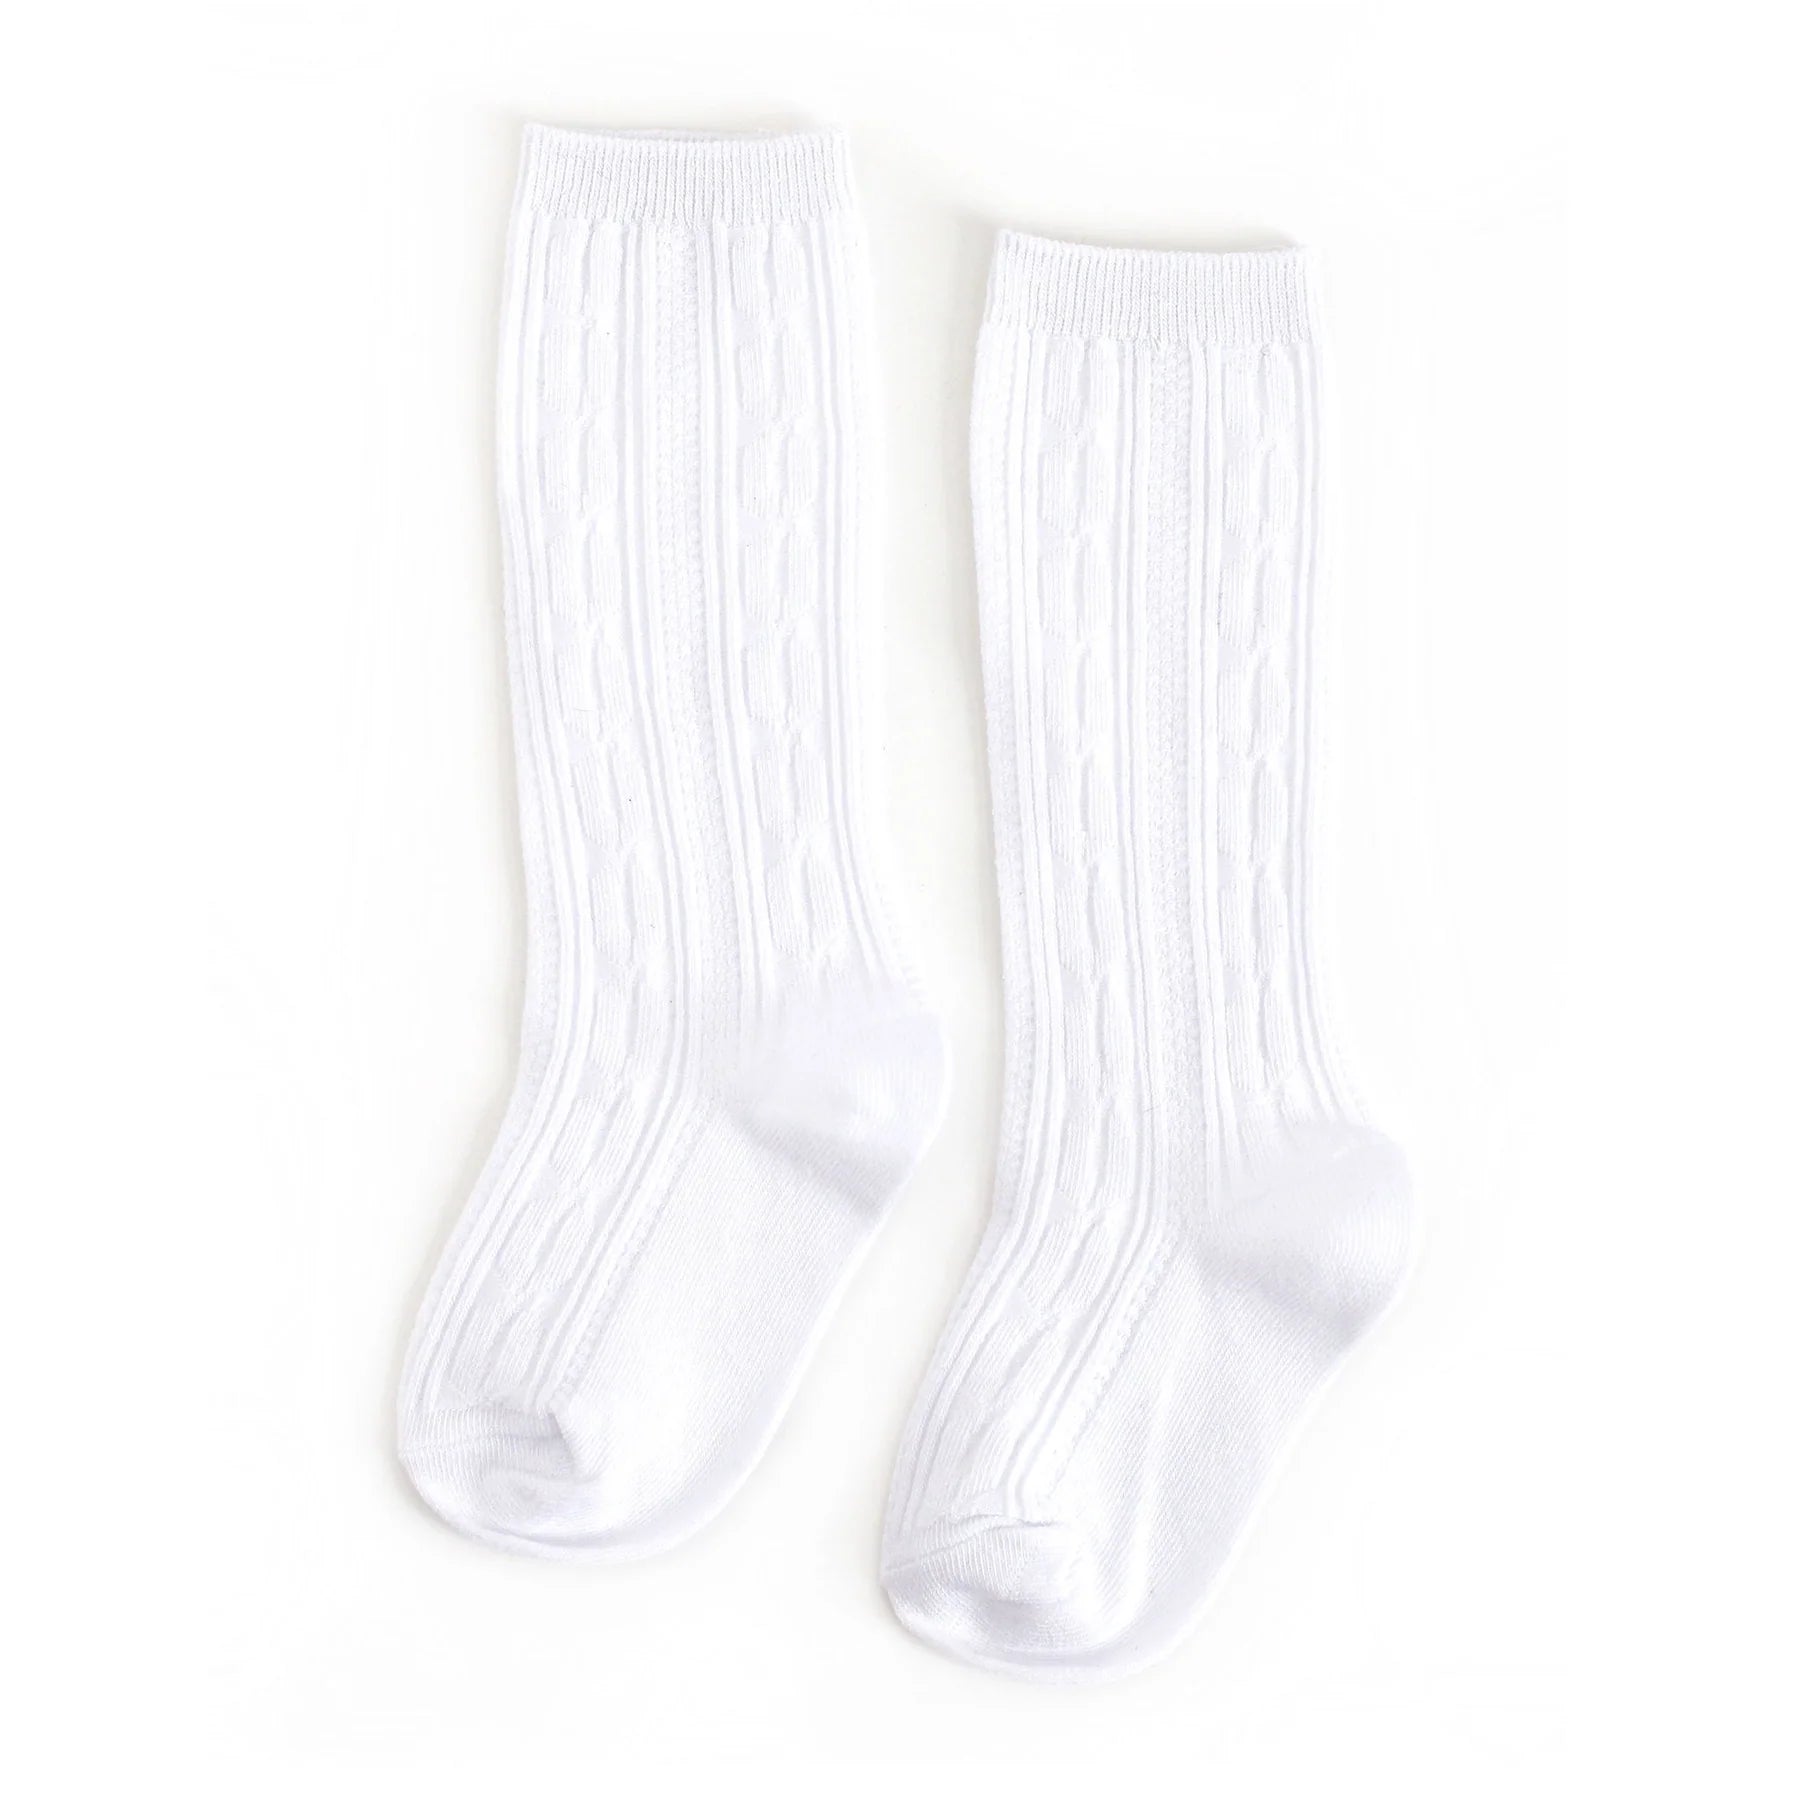 White Cable Knit Knee High Socks